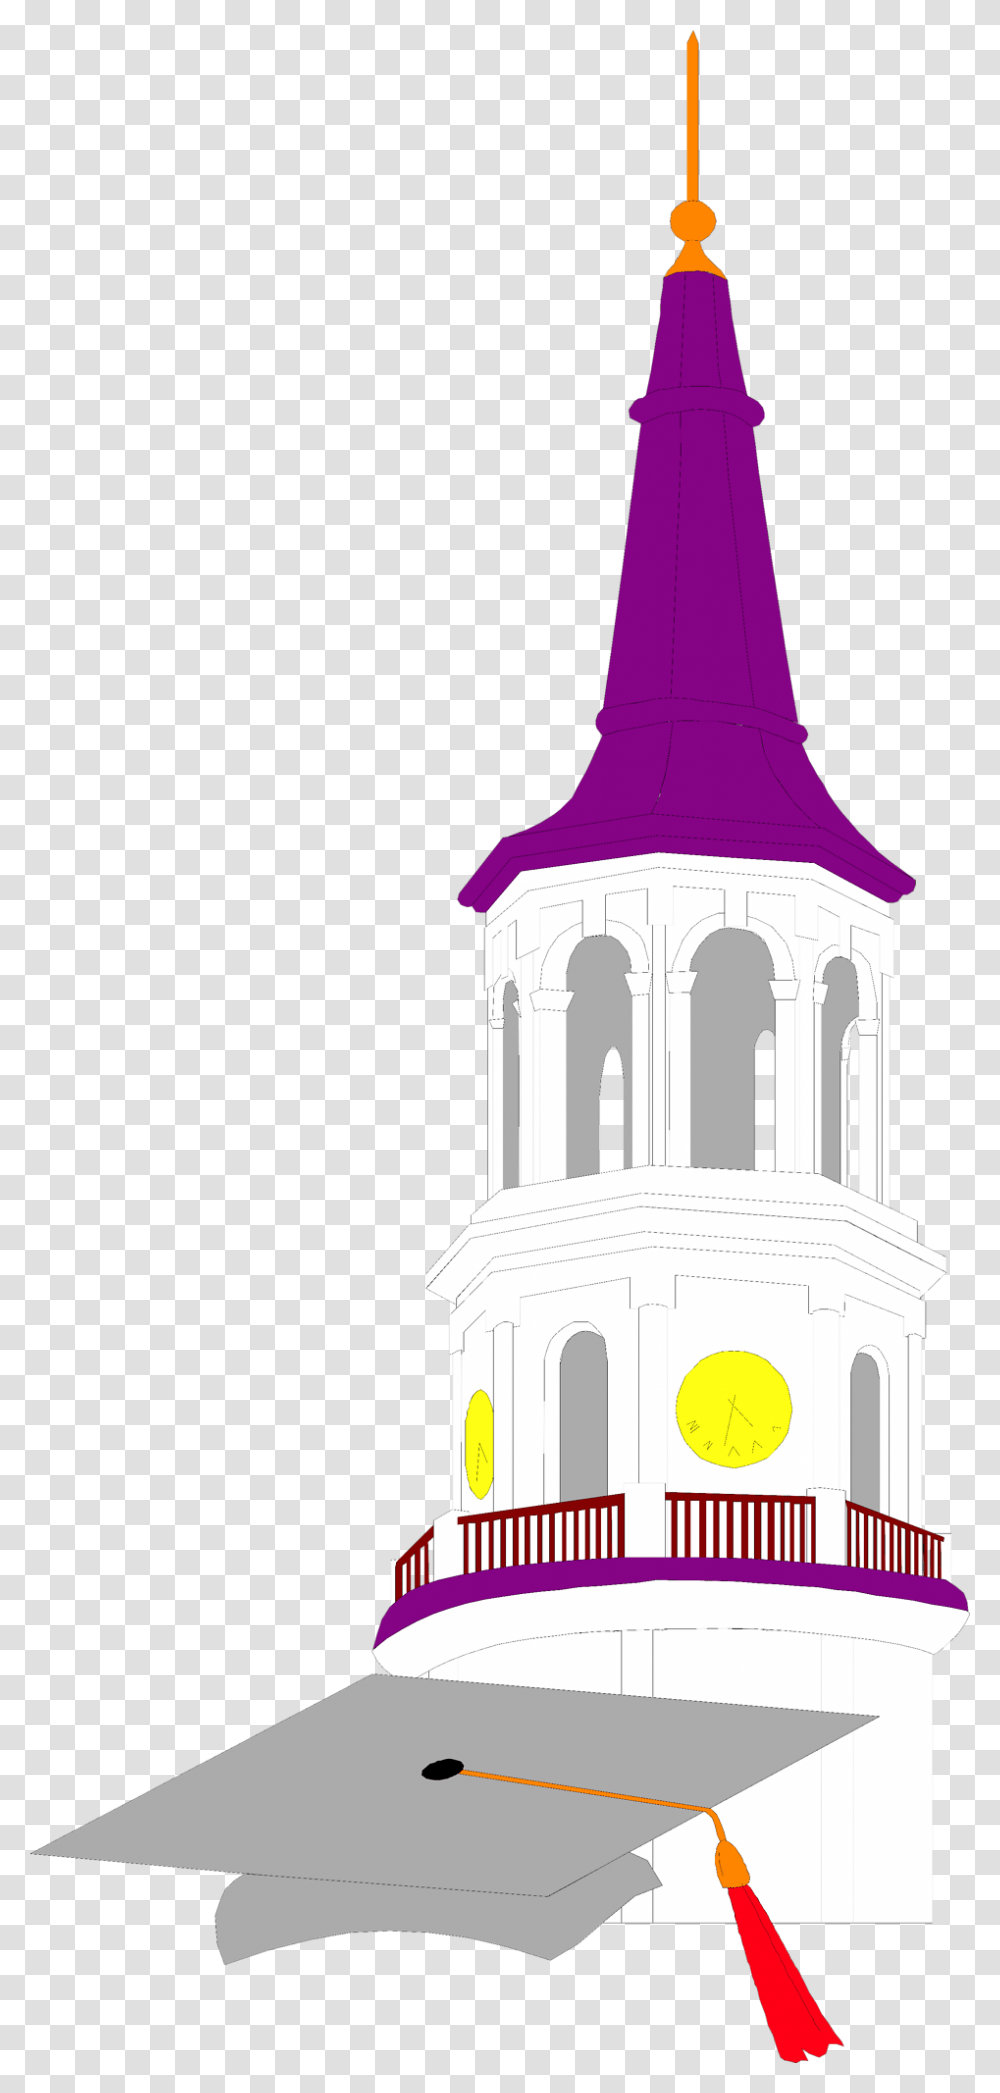 City Hall City Council Clip Art, Architecture, Building, Tower, Bell Tower Transparent Png